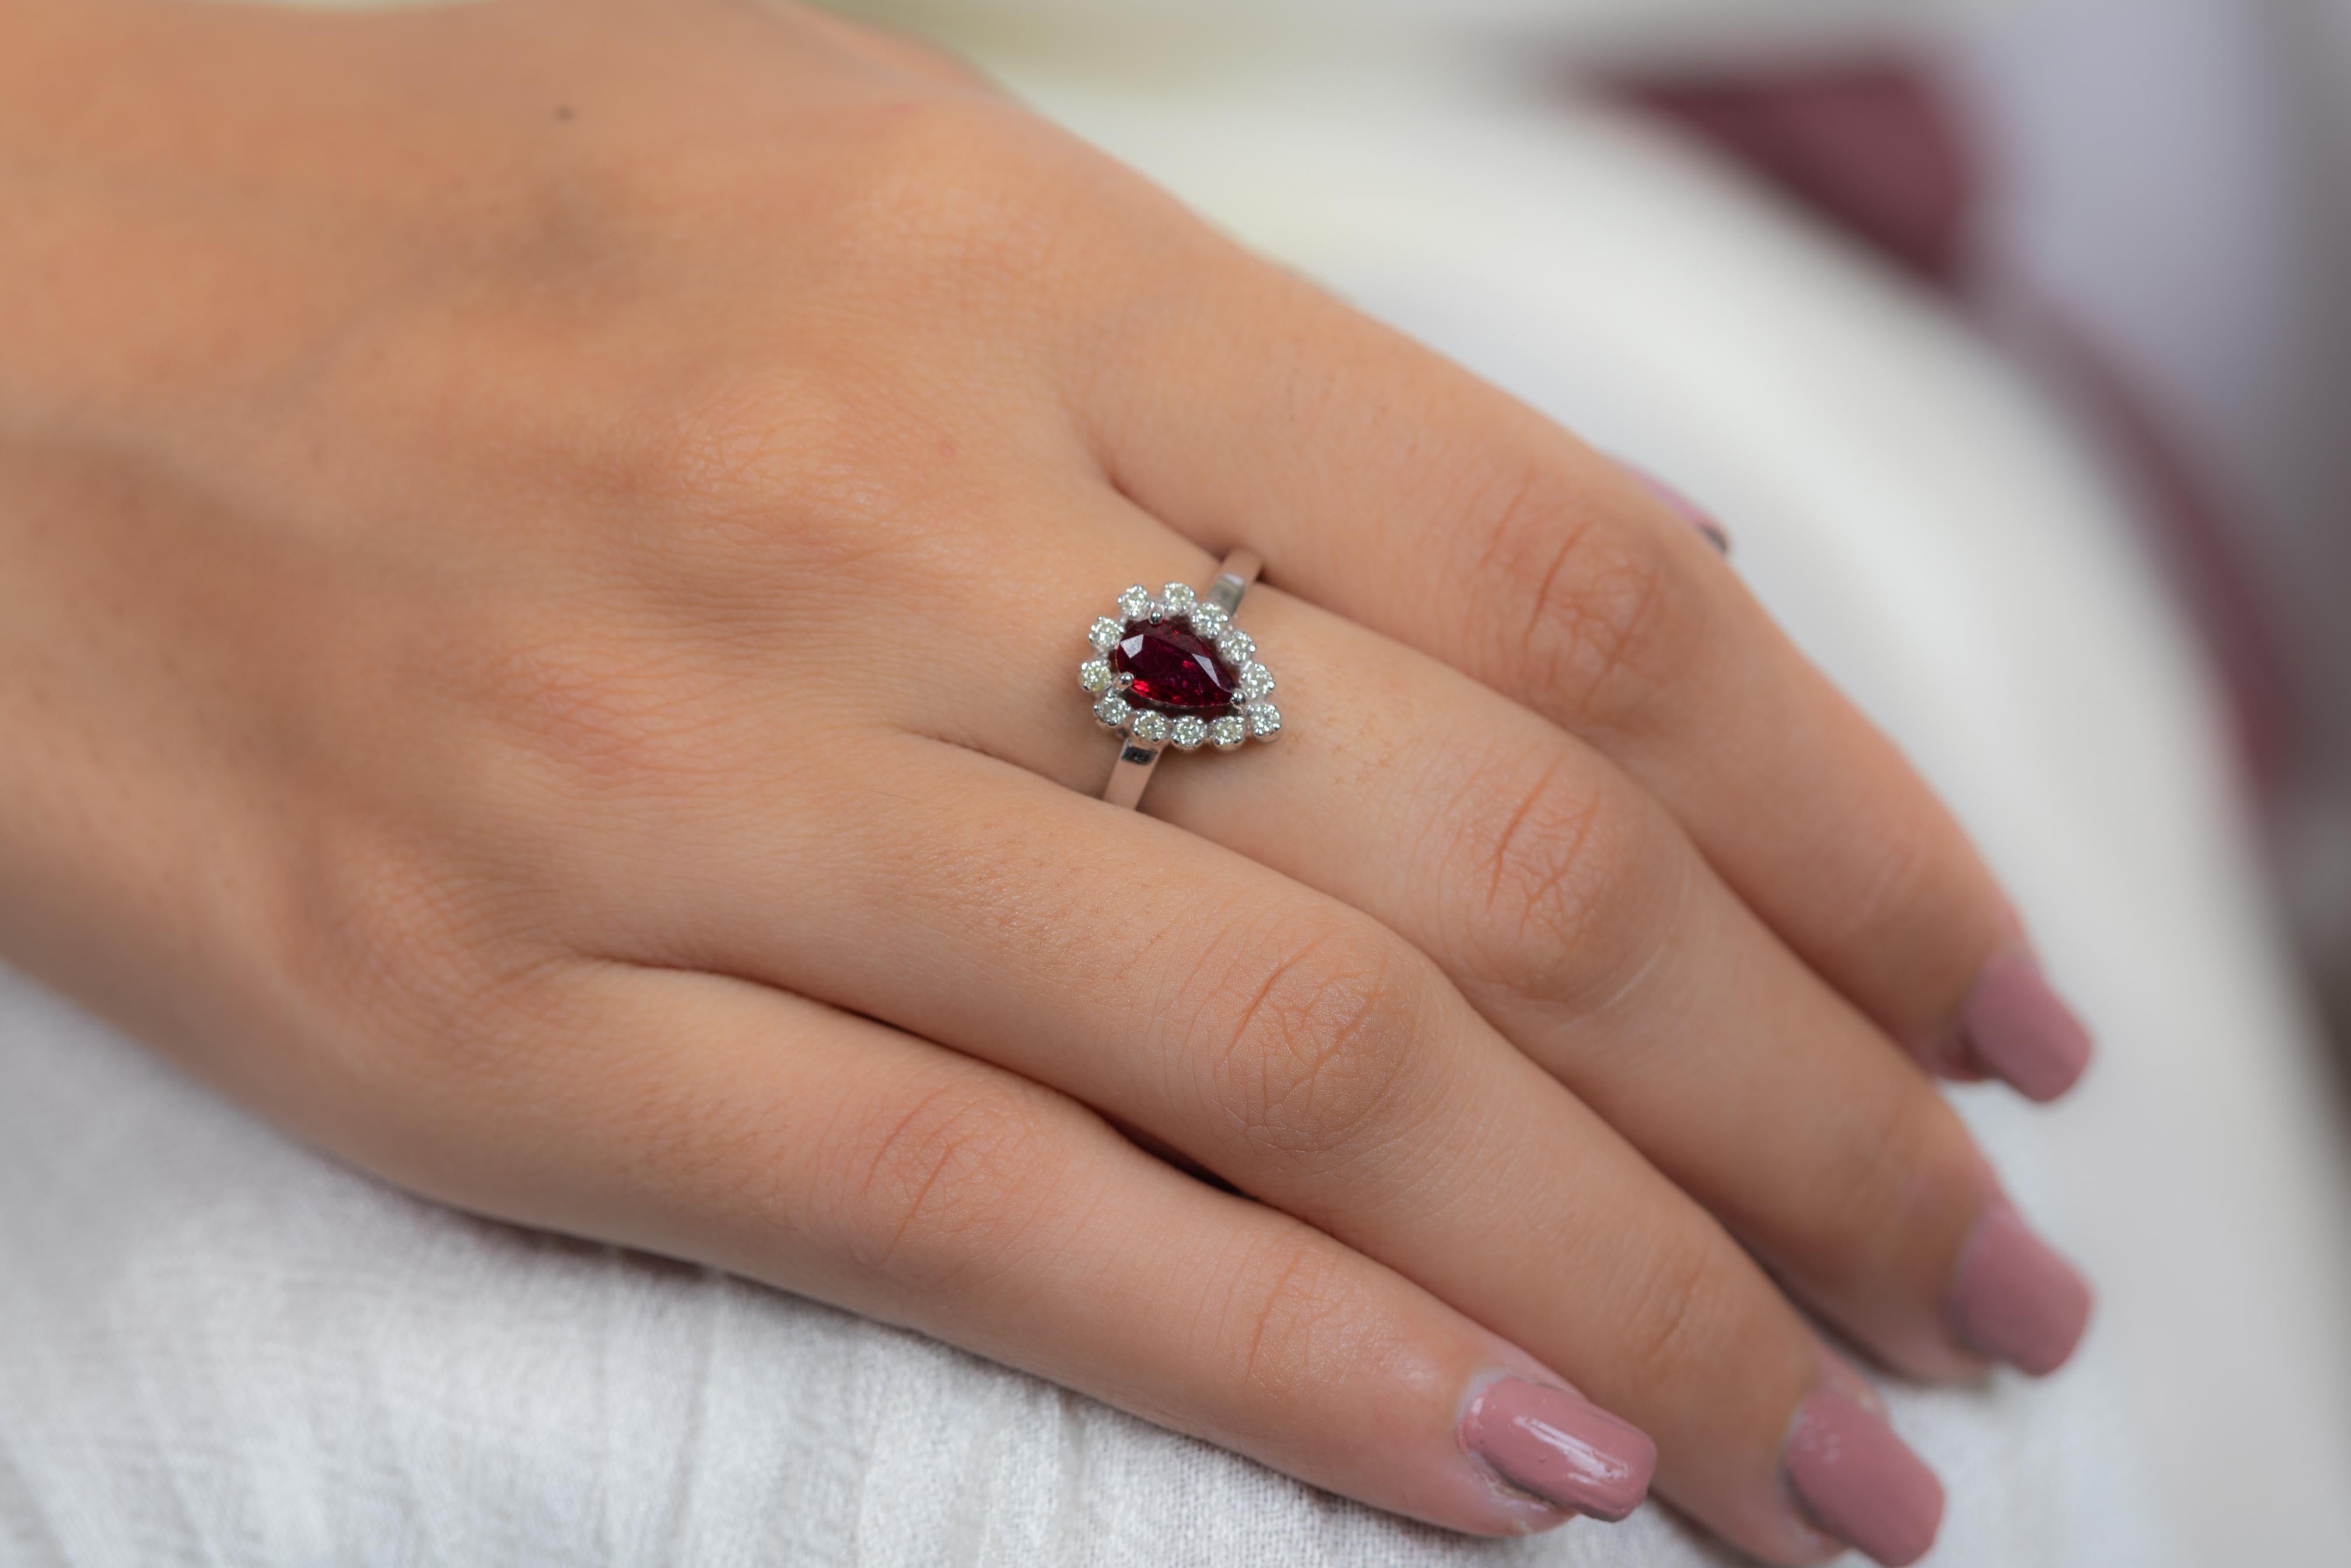 For Sale:  Pear Cut Ruby Diamond Engagement Ring in 14K White Gold  7